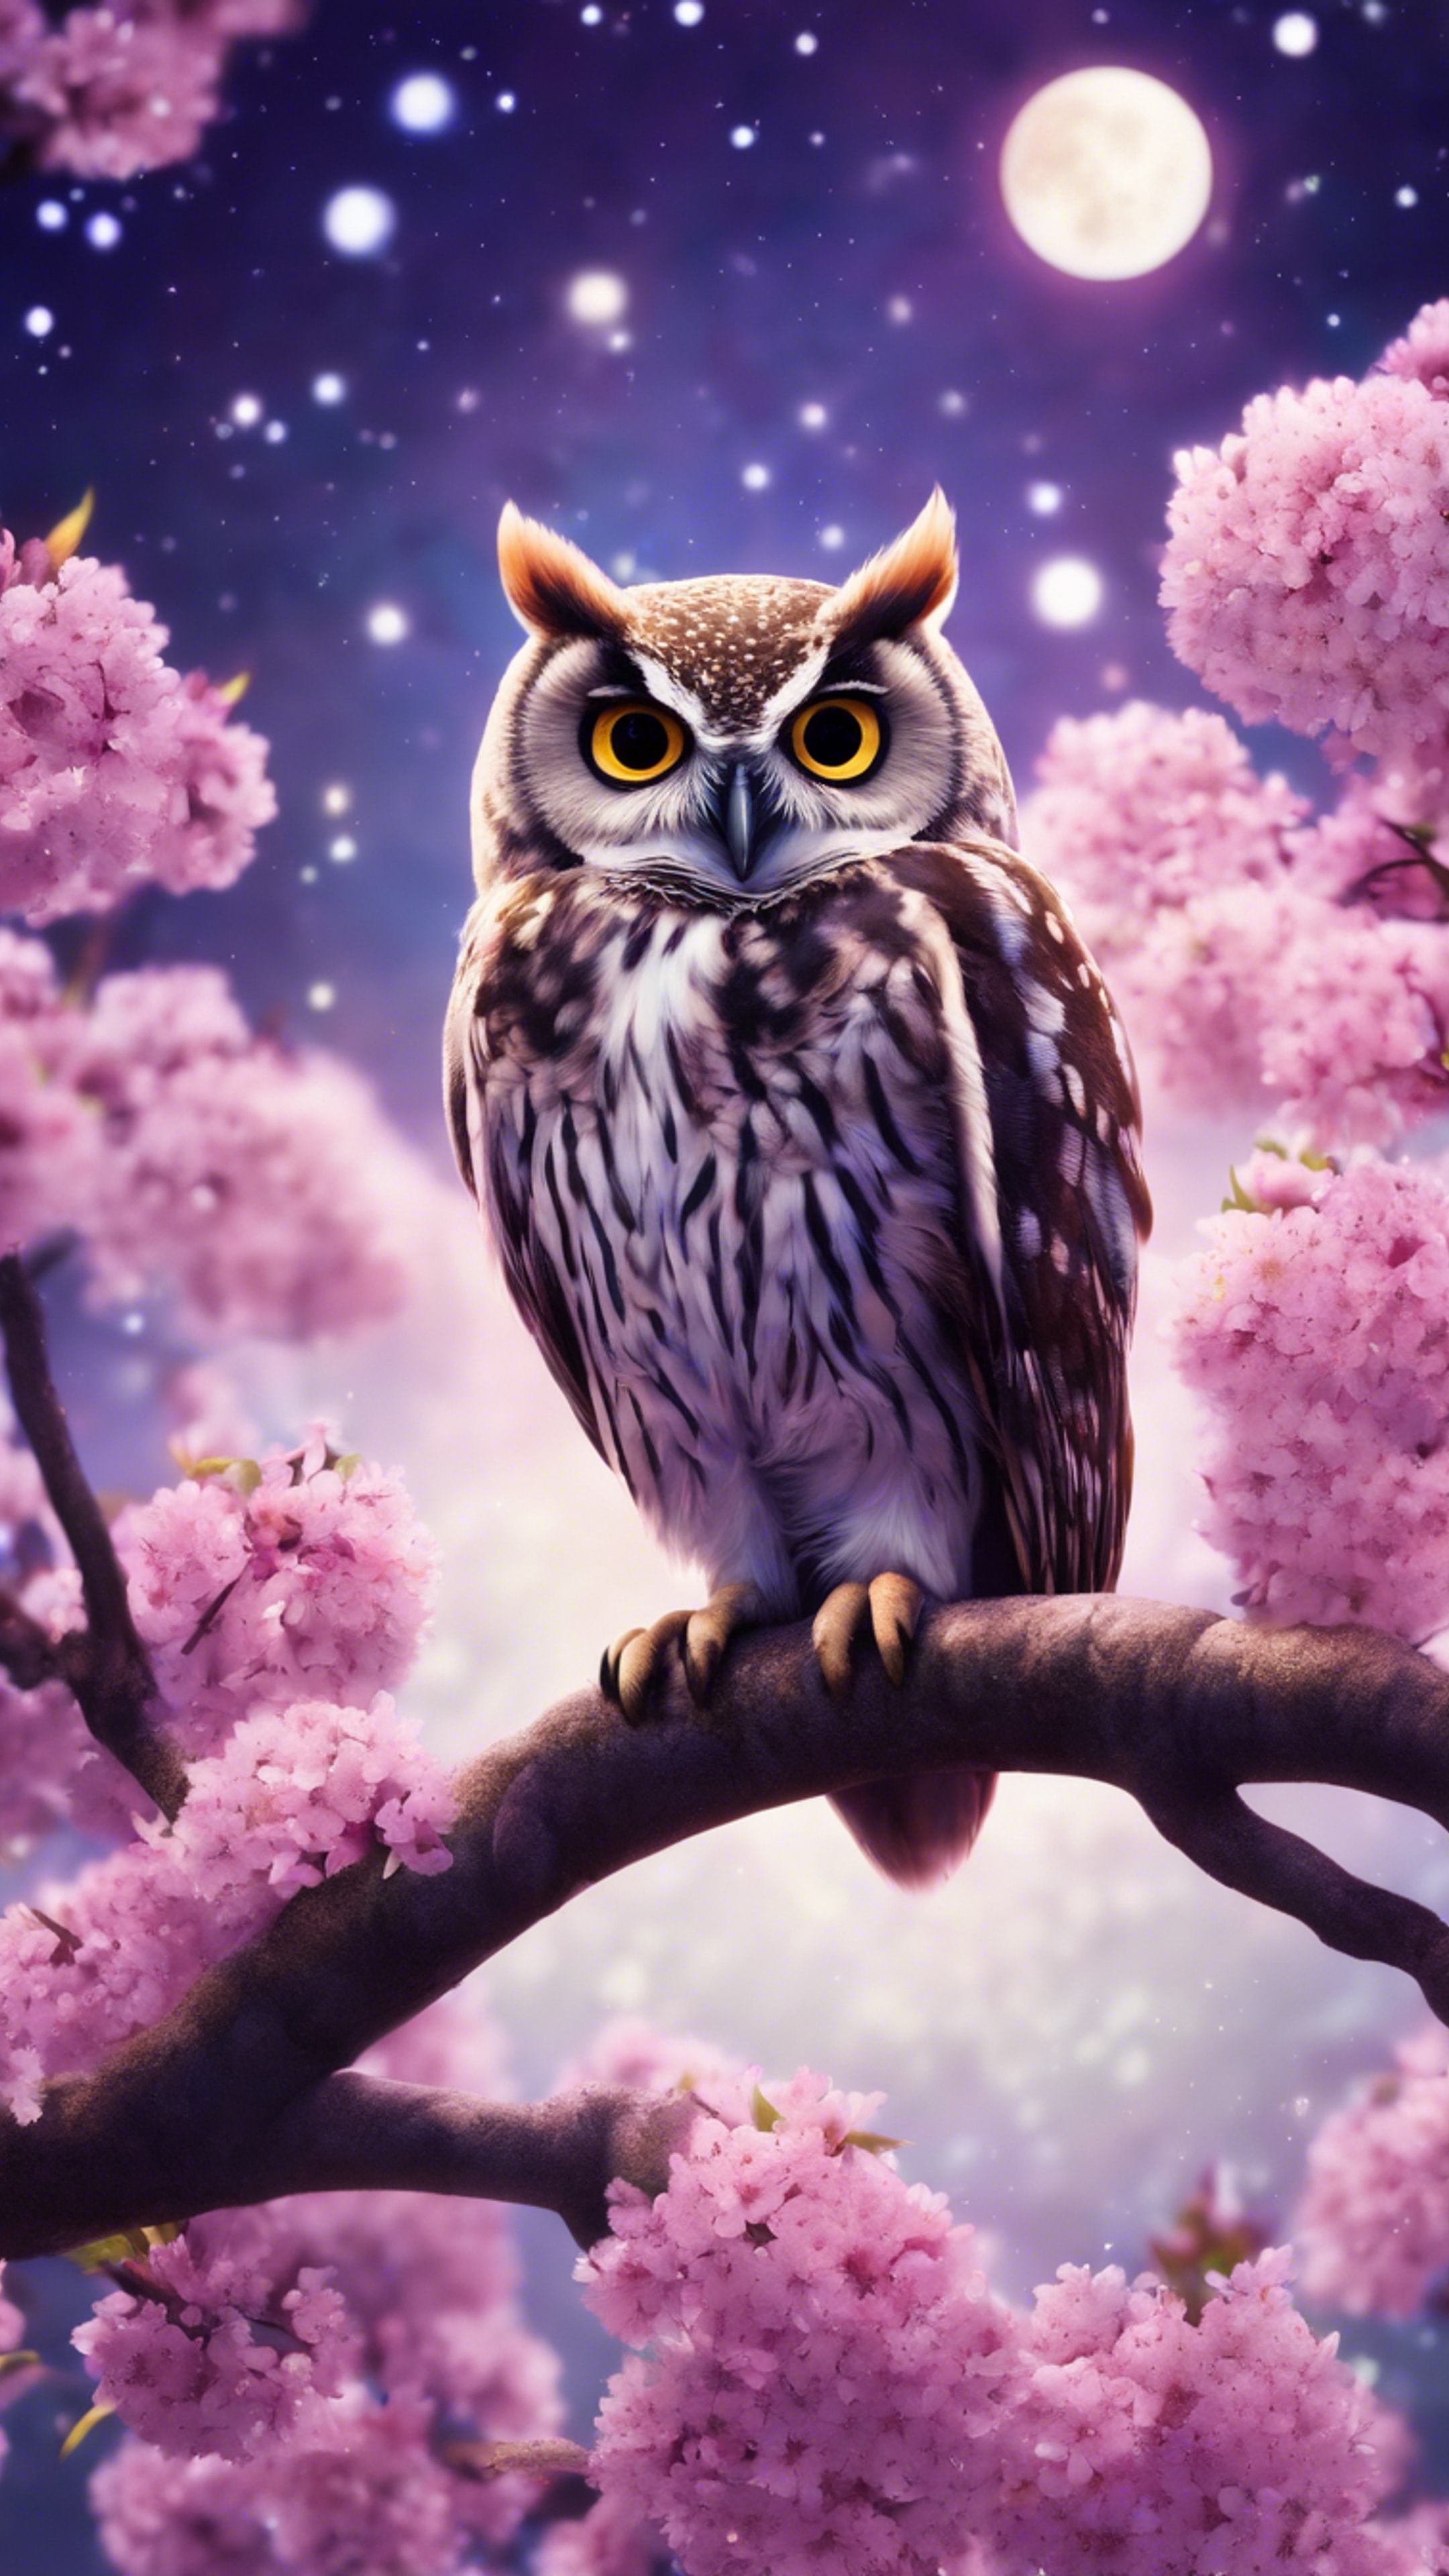 A cute kawaii style owl perched on a cherry blossom tree that blooms vibrant purple flowers, under a moonlit starry night. Hình nền[d4c437875b7e43ac9353]